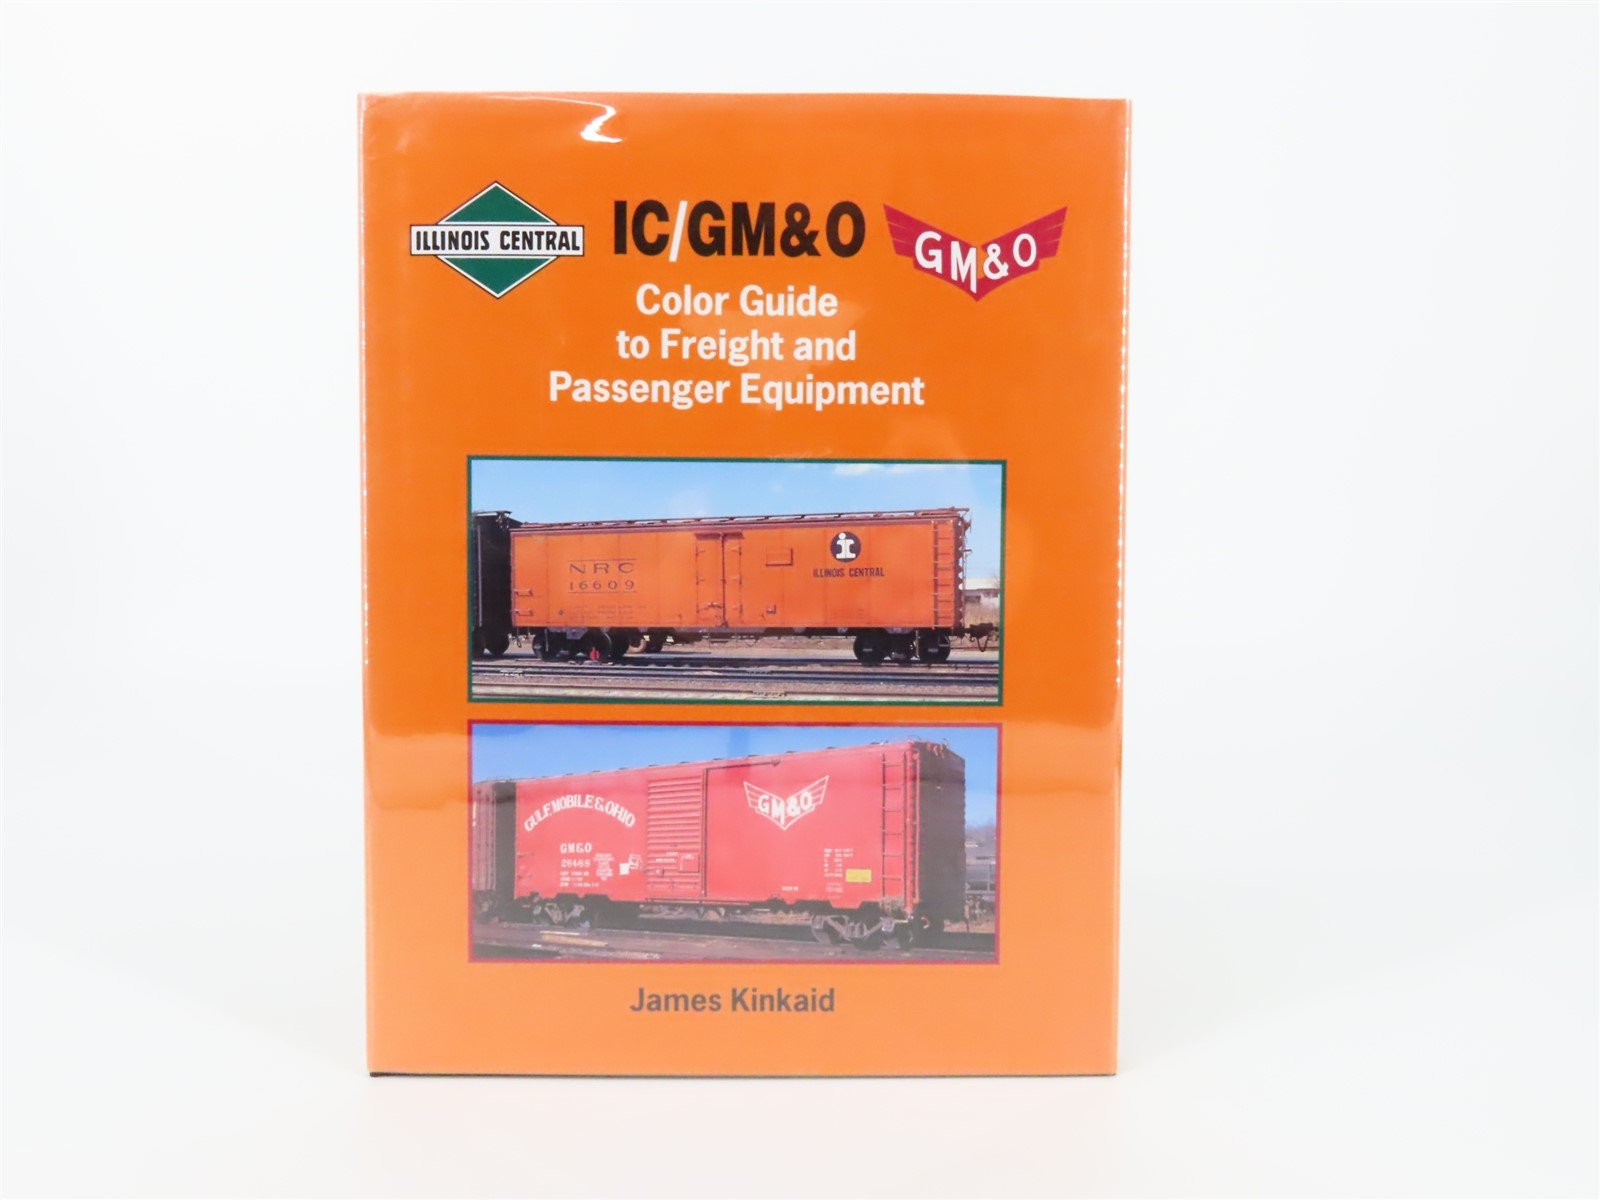 Morning Sun Books - IC/GM&O Color Guide to Freight and Passenger Equipment ©2002